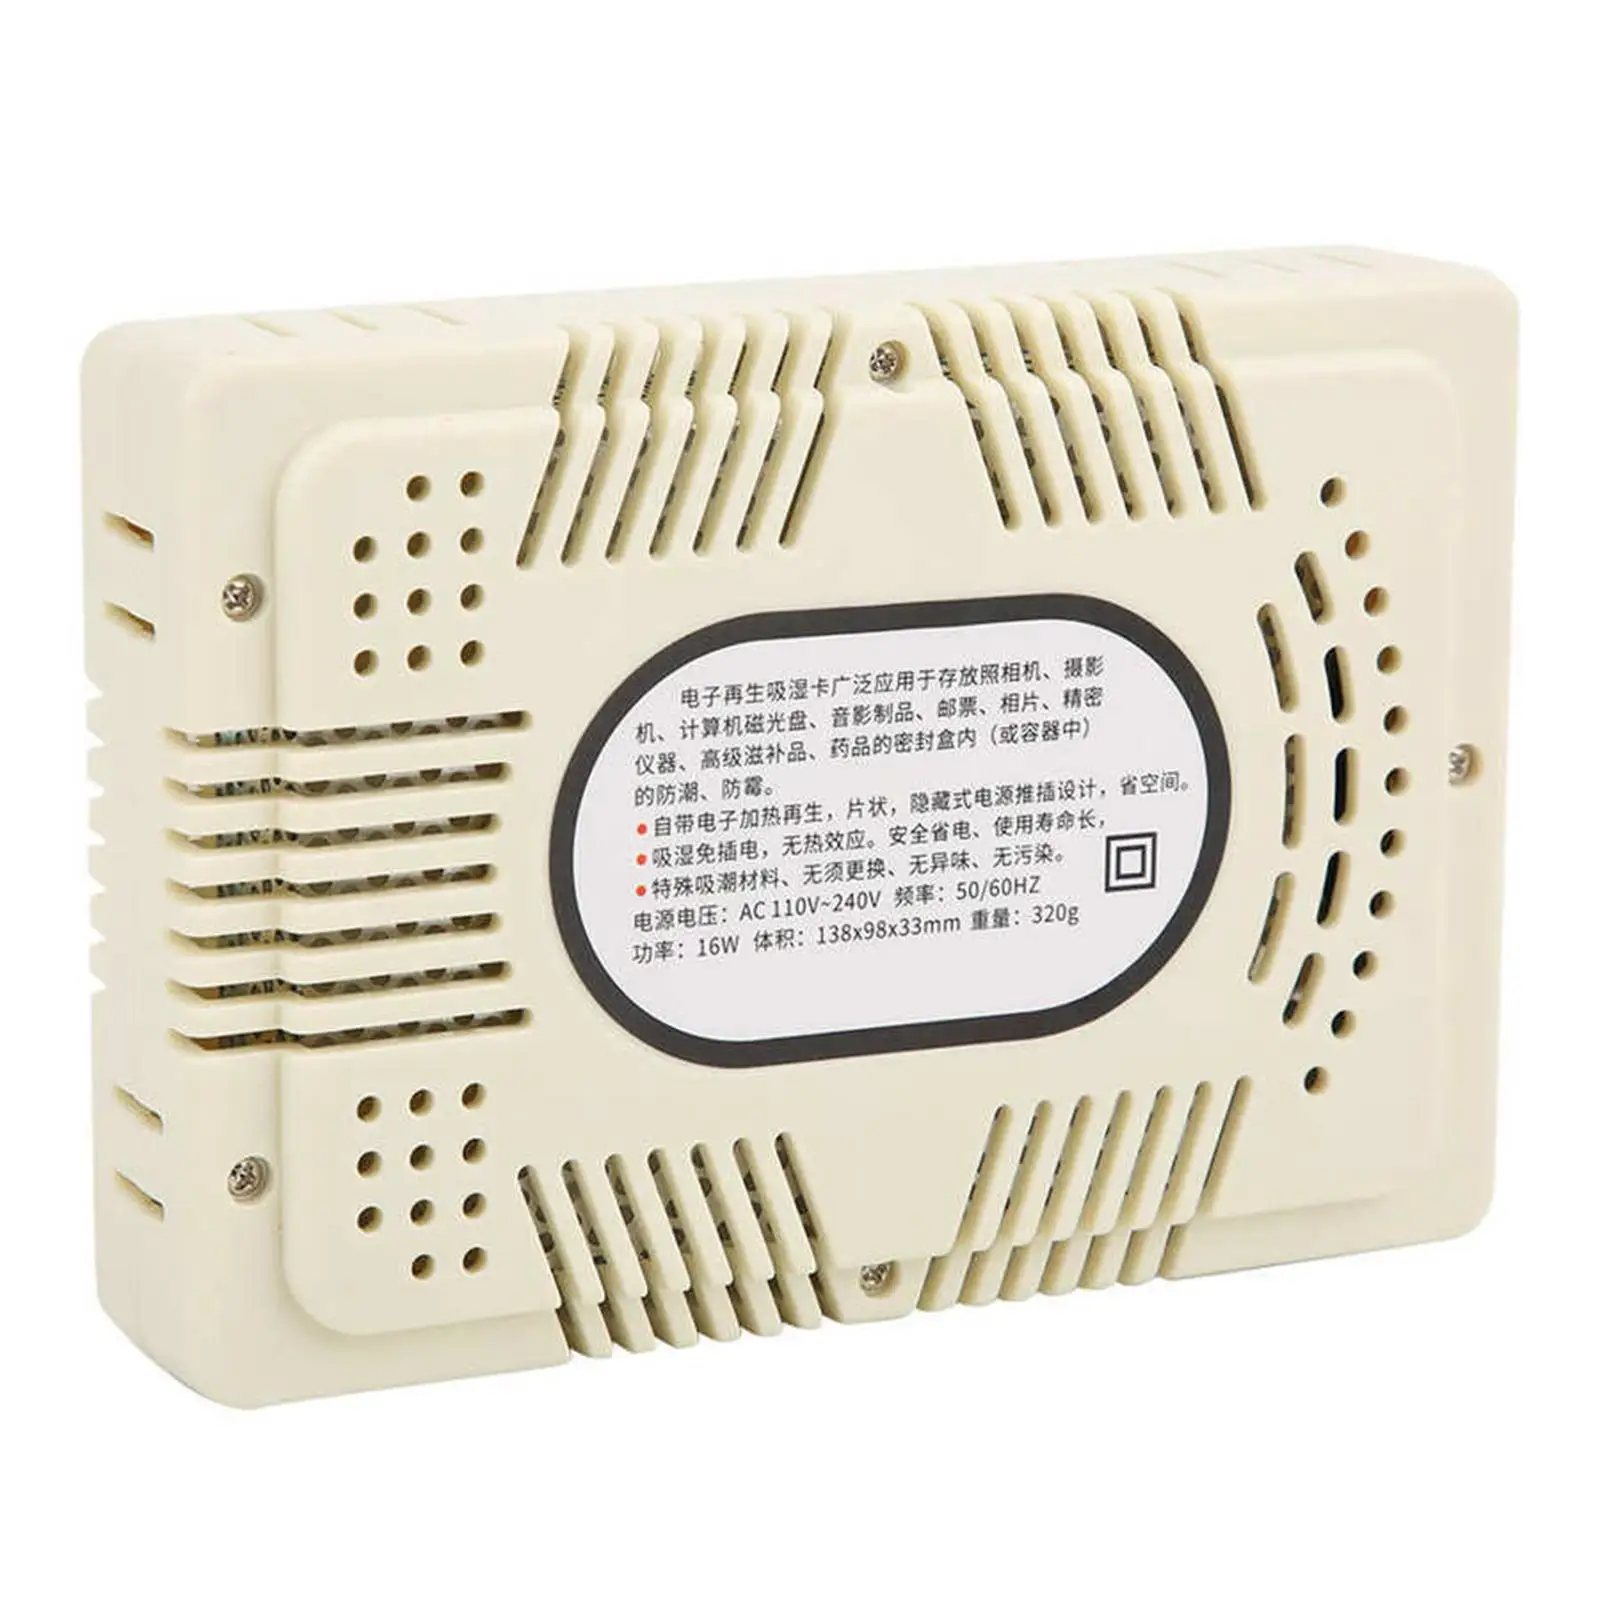 Electronic Regeneration Hygroscopic Card Widely Applicable Convenient 16W 138x98x33mm Easy to Use Portable White Accessories US